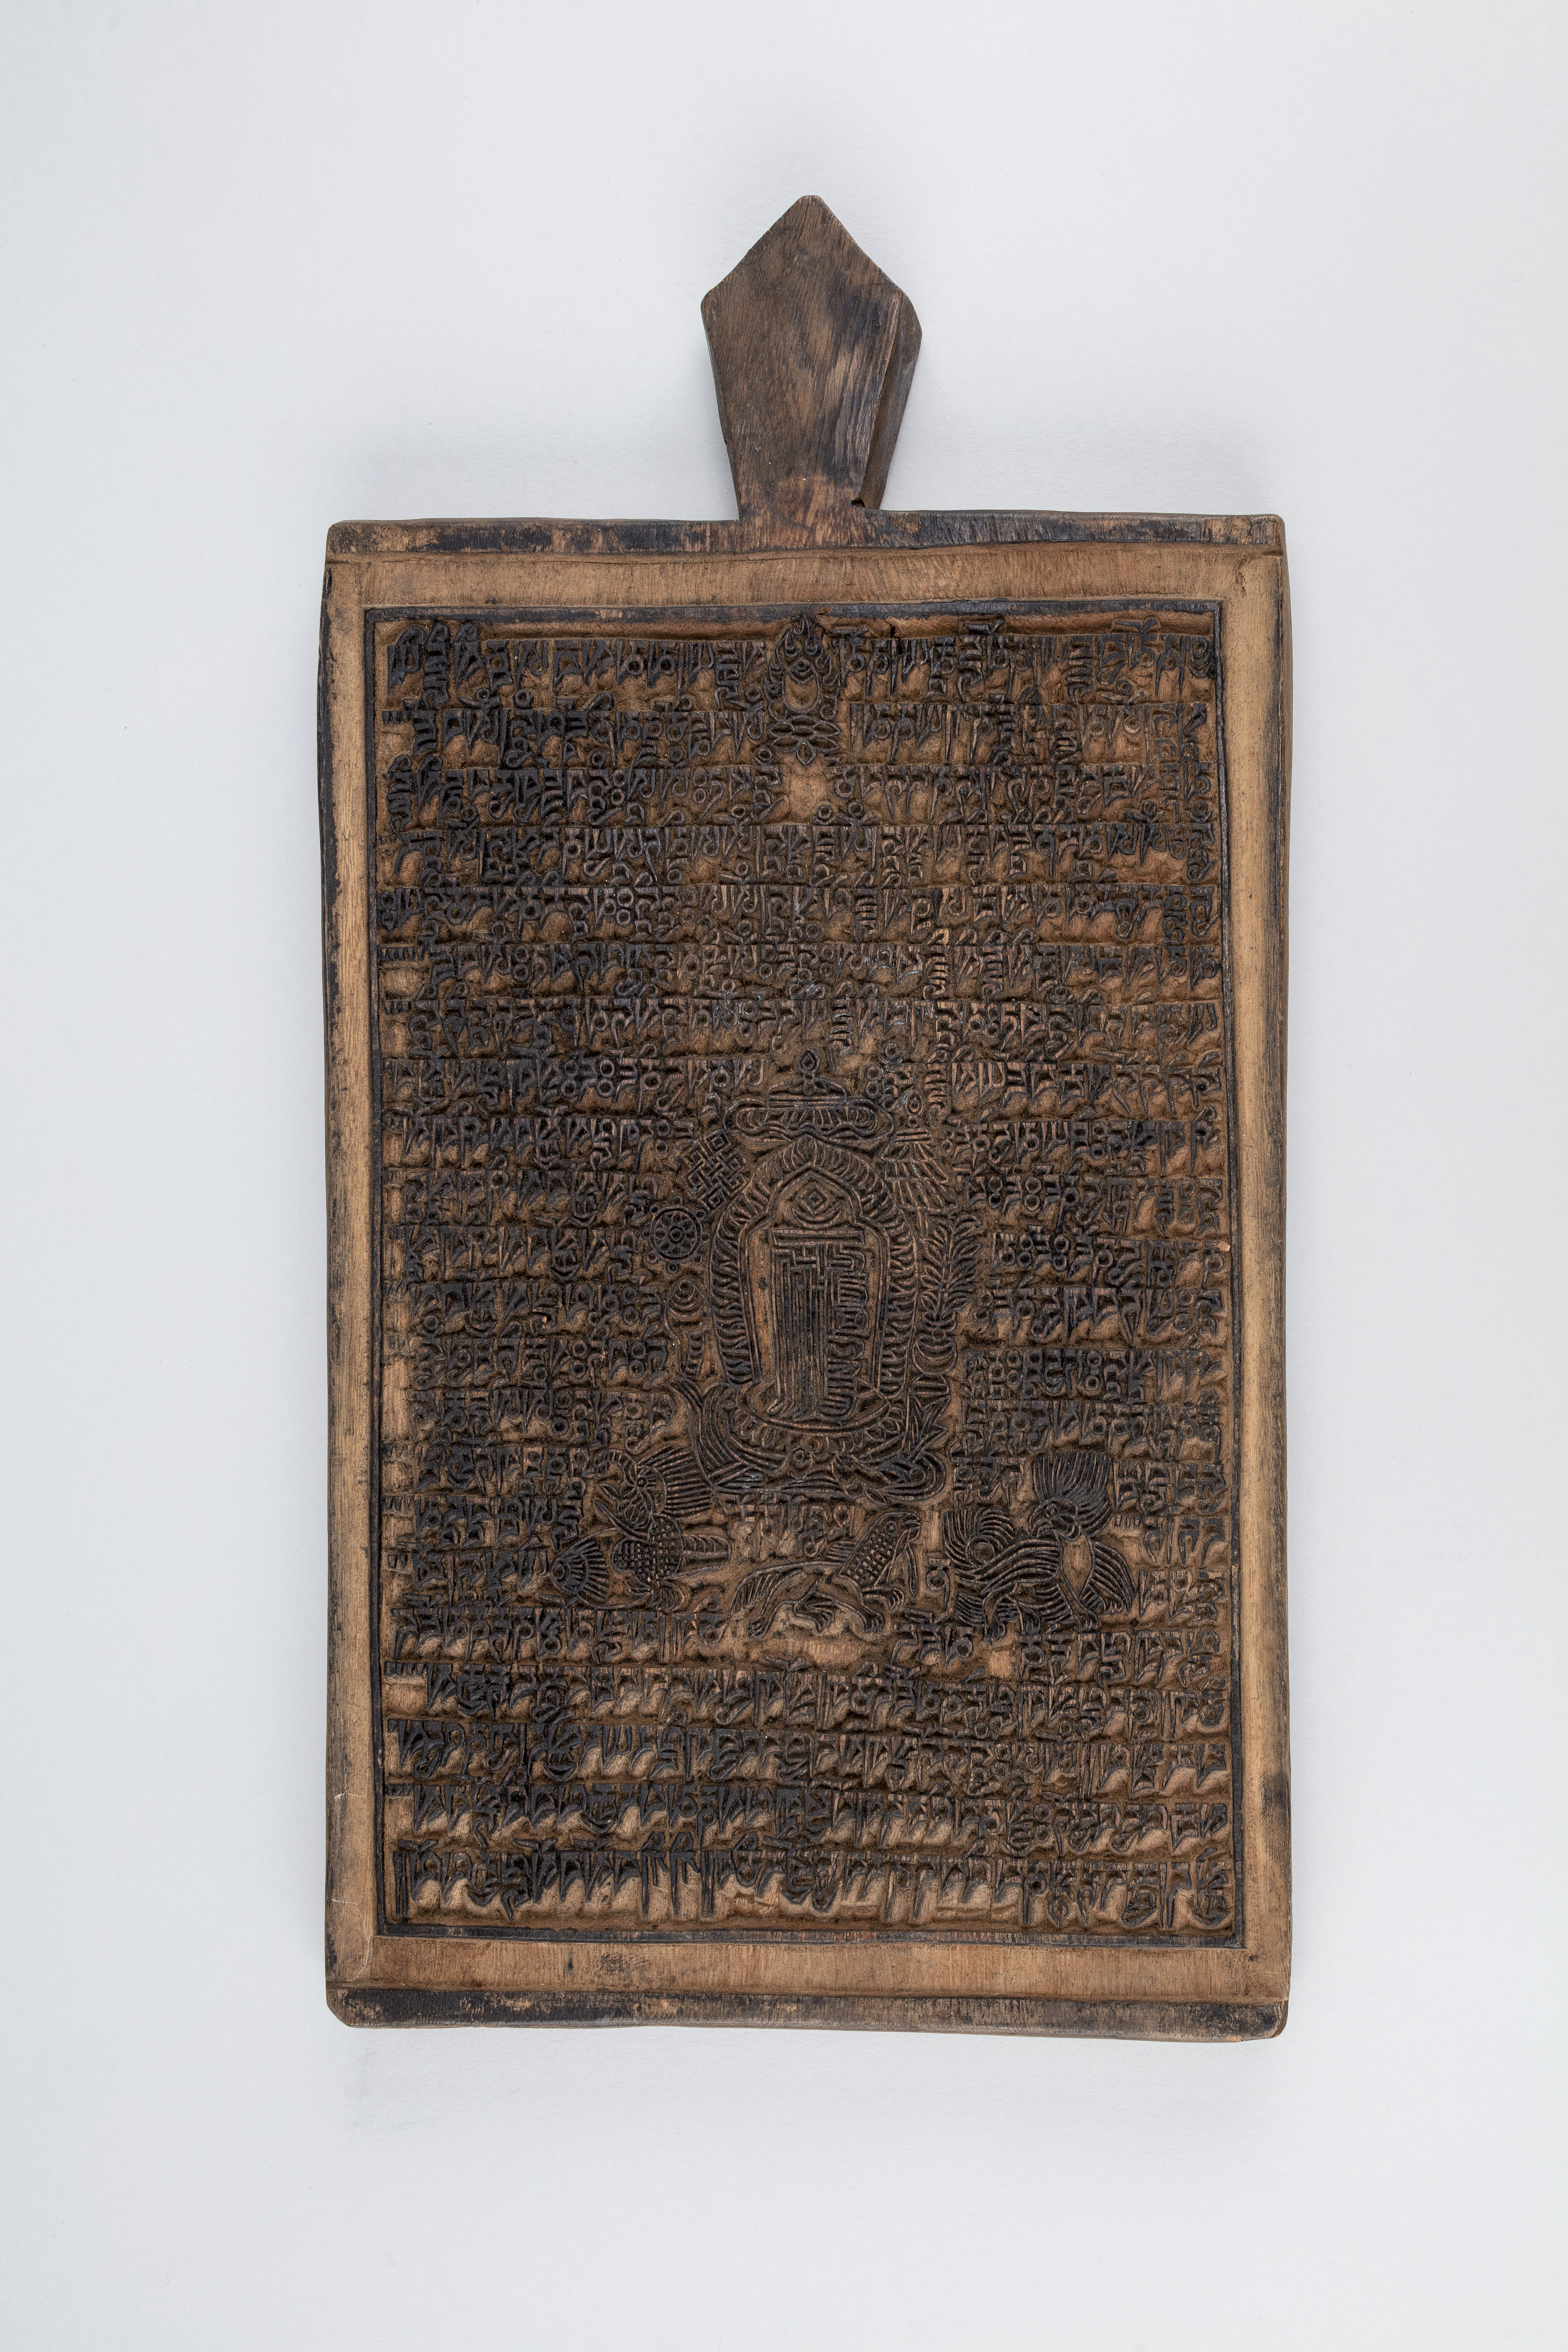 Rectangular ink-stained woodblock incised with dense text and image; lozenge-shaped handle at top